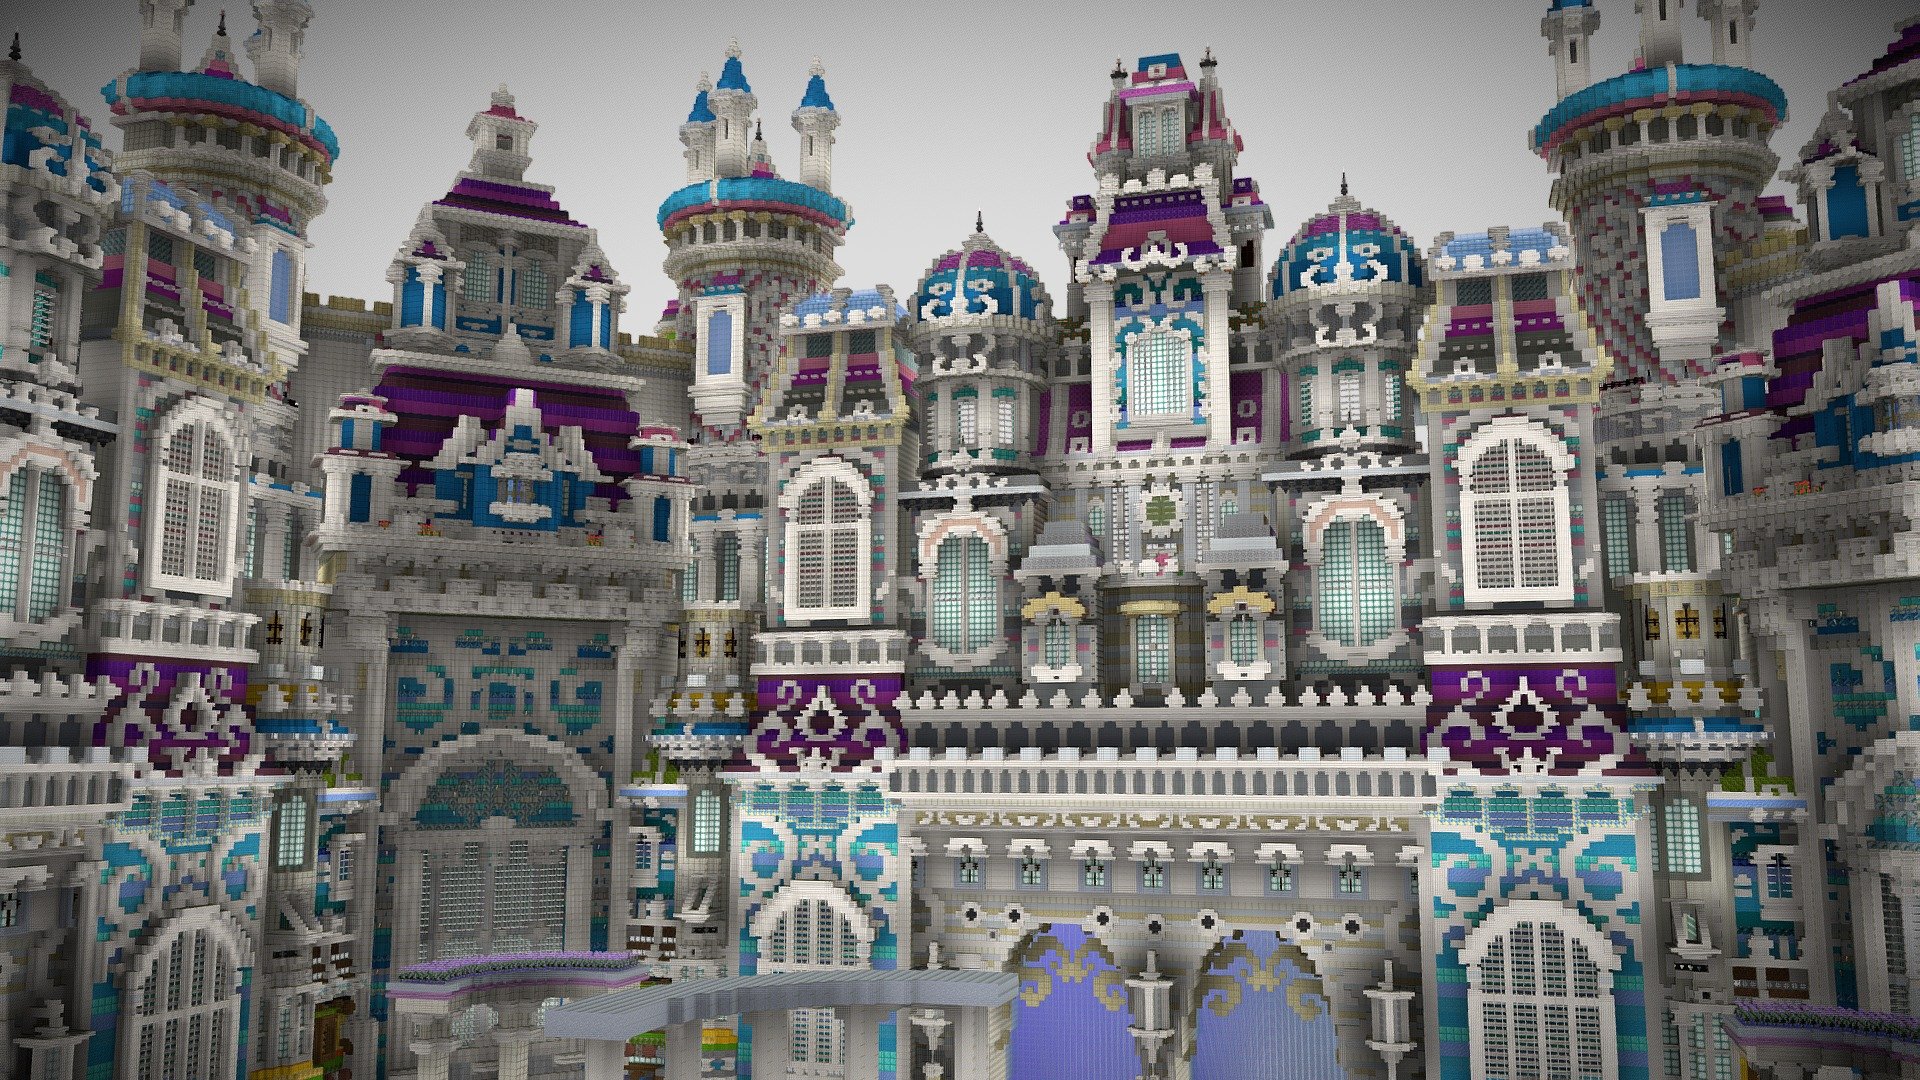 Build a minecraft castle by Haven_builds